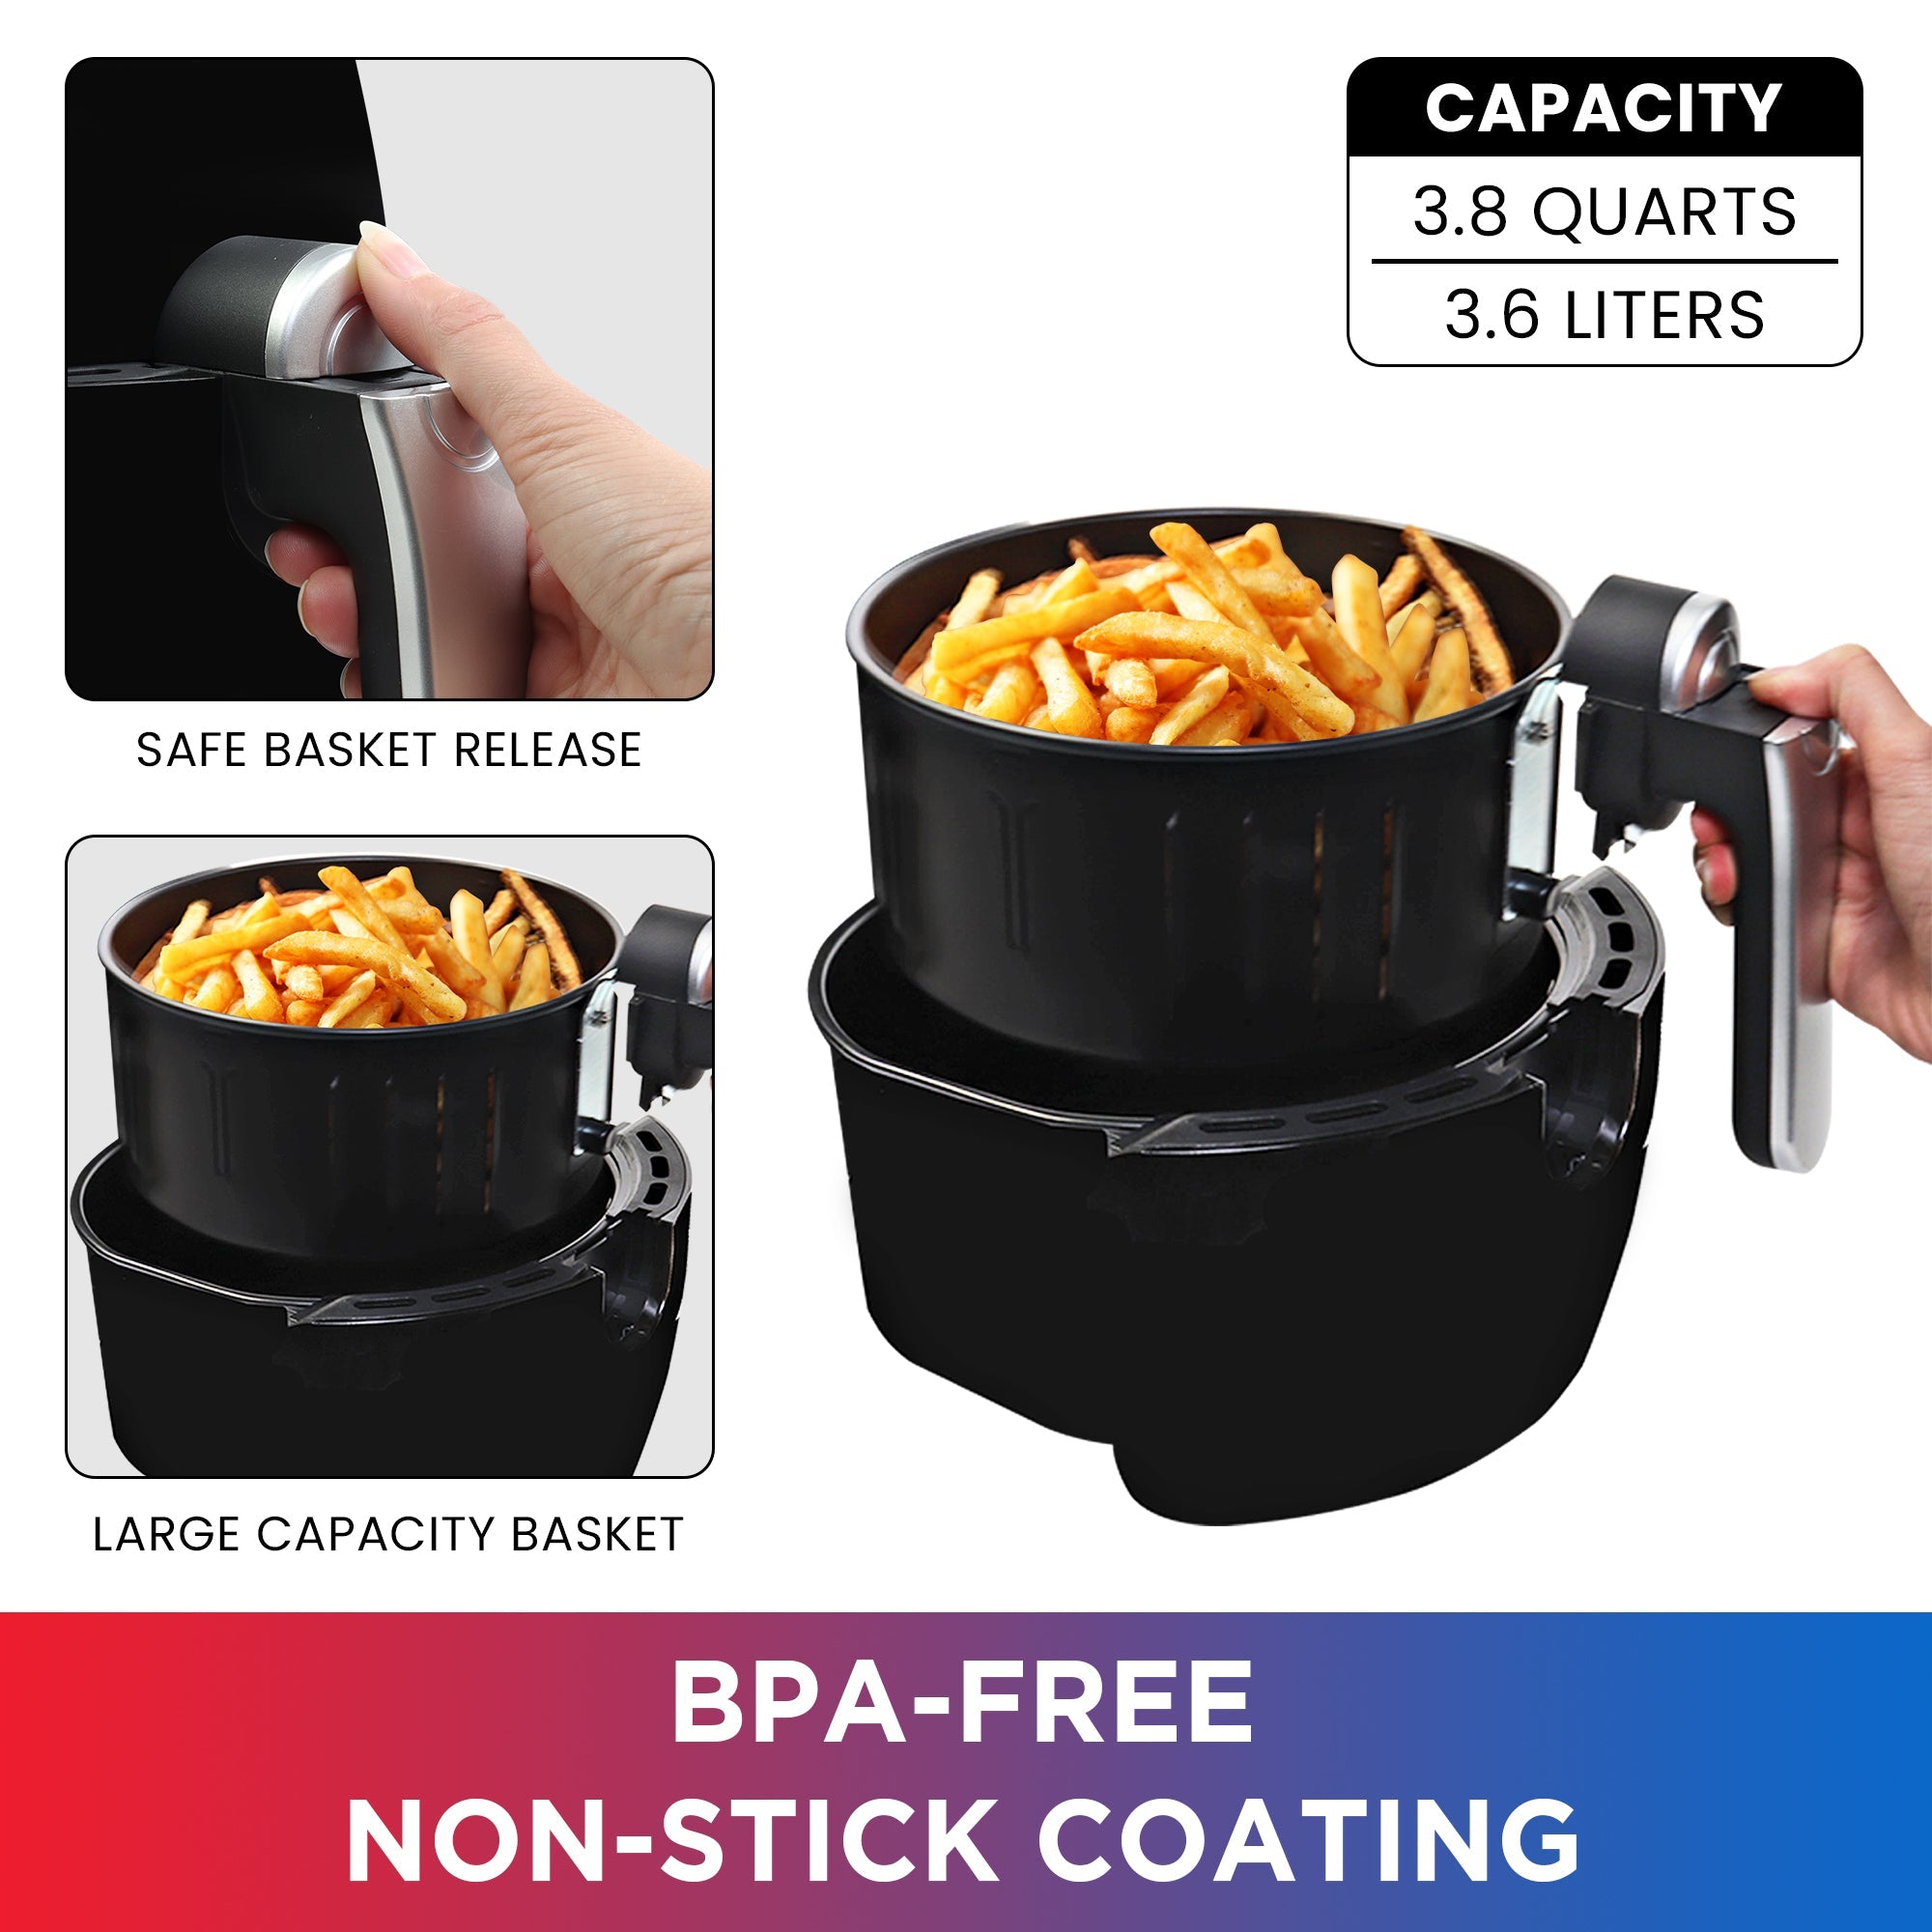 Product shot of a person's hand lifting the cooking basket, filled with French fries, out of the cooking drawer, on a white background. Two inset closeups show 1. A person's hand holding the handle and pressing the release, labeled, "Safe basket release" and 2. The cooking basket filled with fries, labeled, "Large capacity basket." Text inset above reads, "Capacity 3.8 quarts; 3.6 liters" and text below reads, "BPA-free non-stick coating"